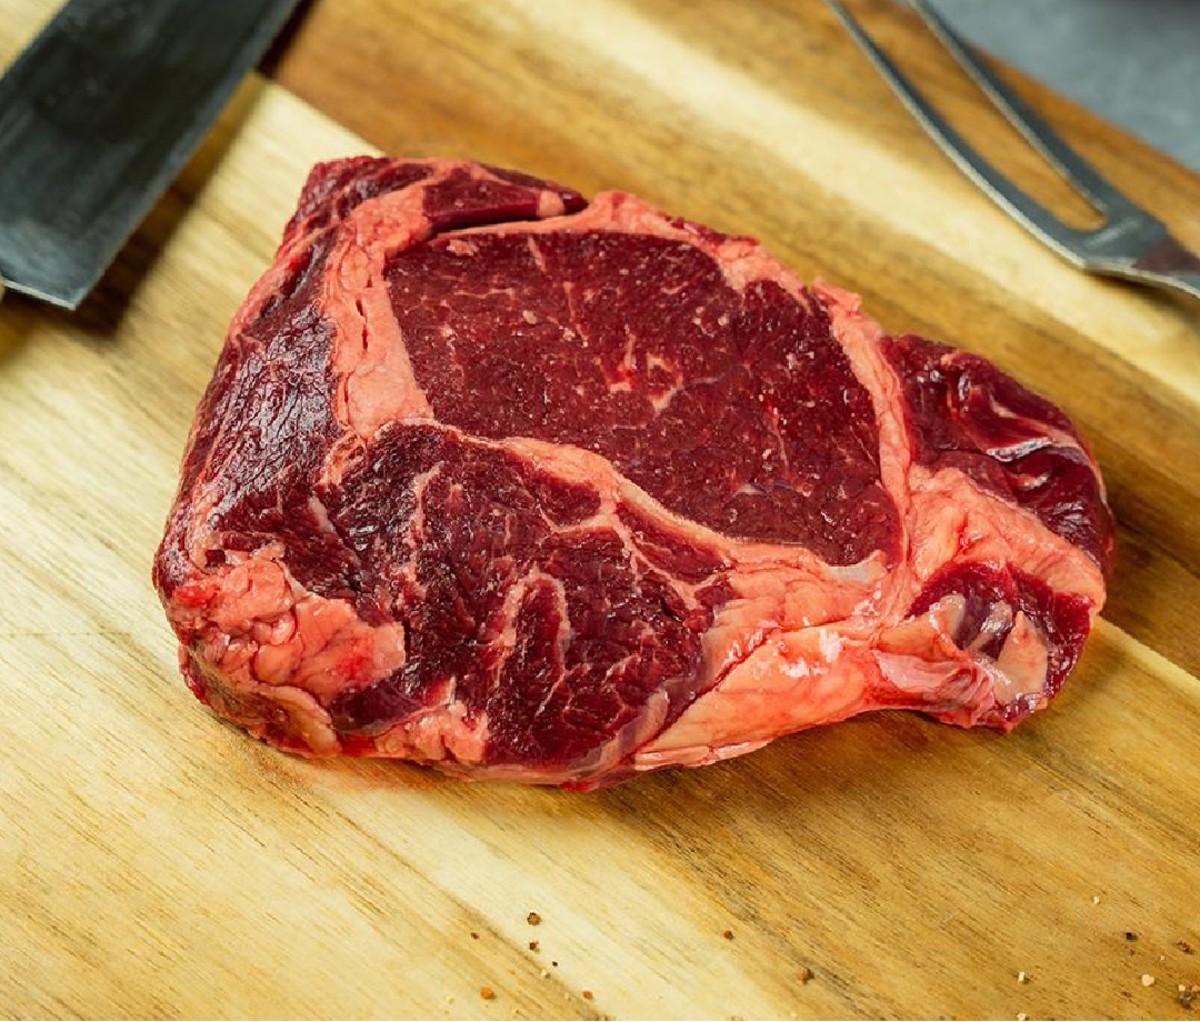 Choose the choicest cuts from these online grass-fed beef suppliers for your Labor Day grill fest.